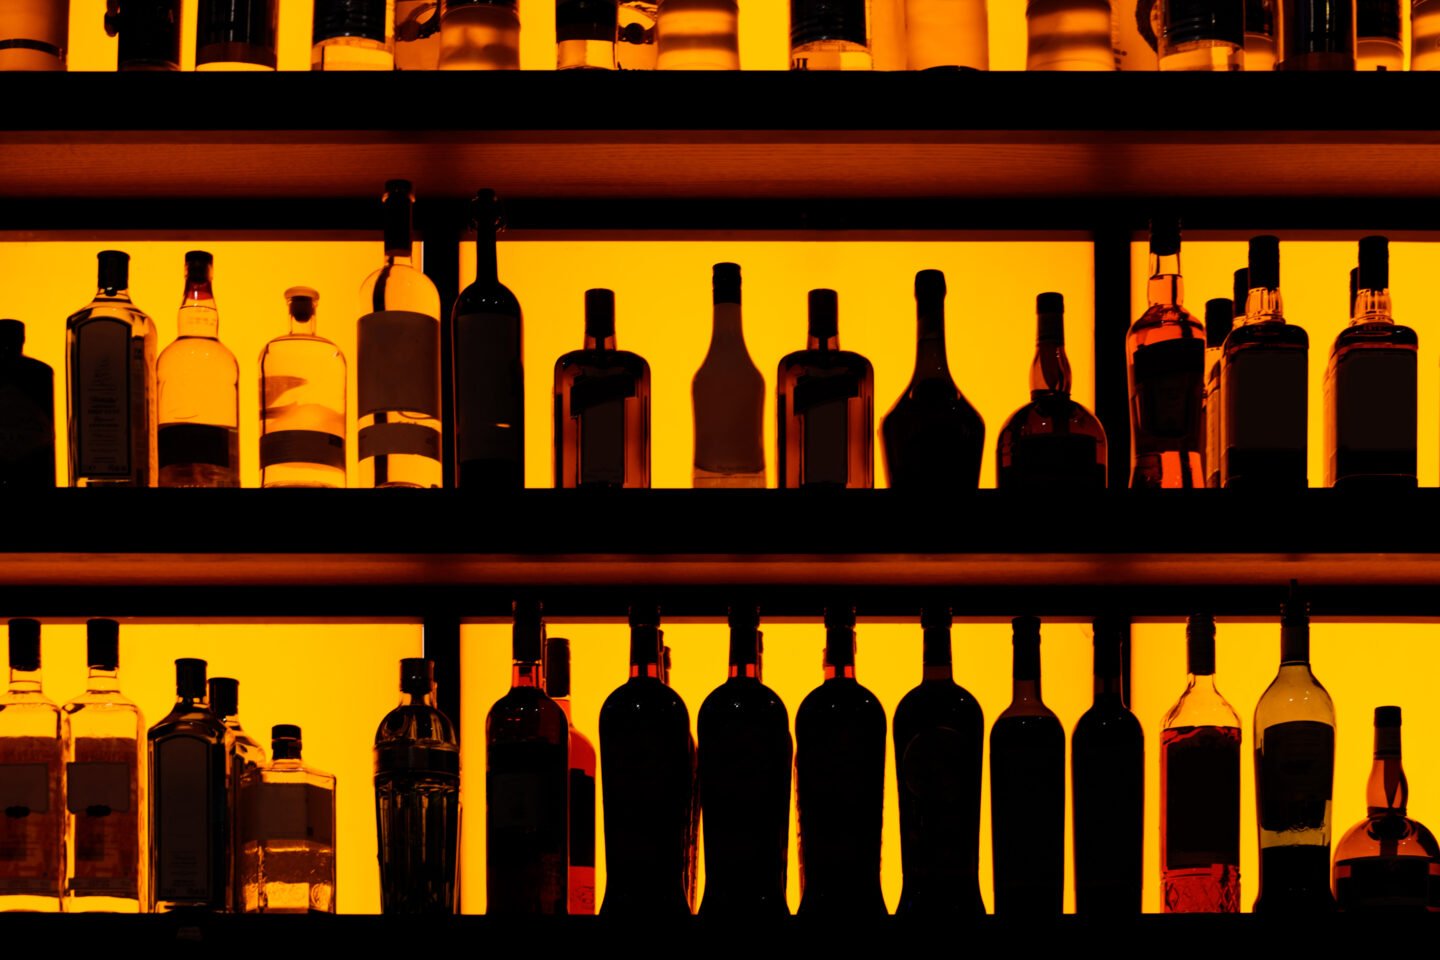 Rows,Of,Bottles,Sitting,On,Shelf,In,A,Bar,,Yellow